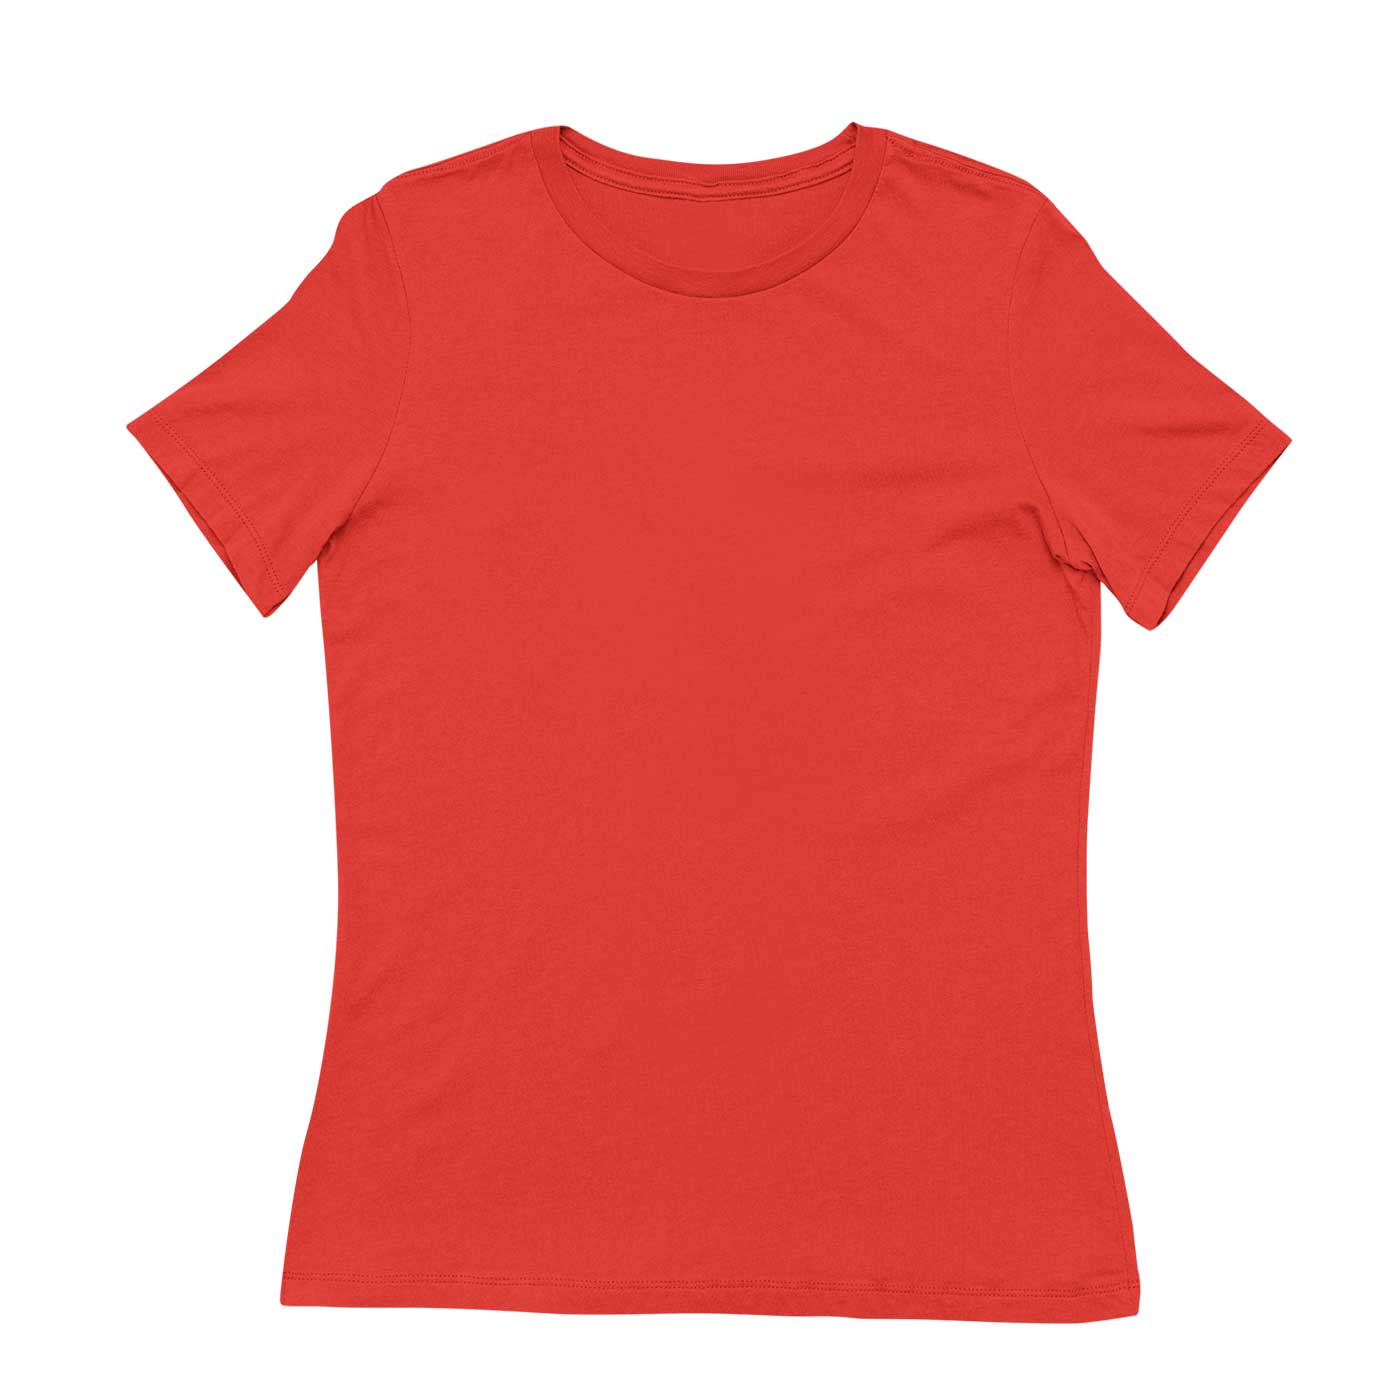 red plain tops by the banyan tee cotton red tops india tops for girls tops for women